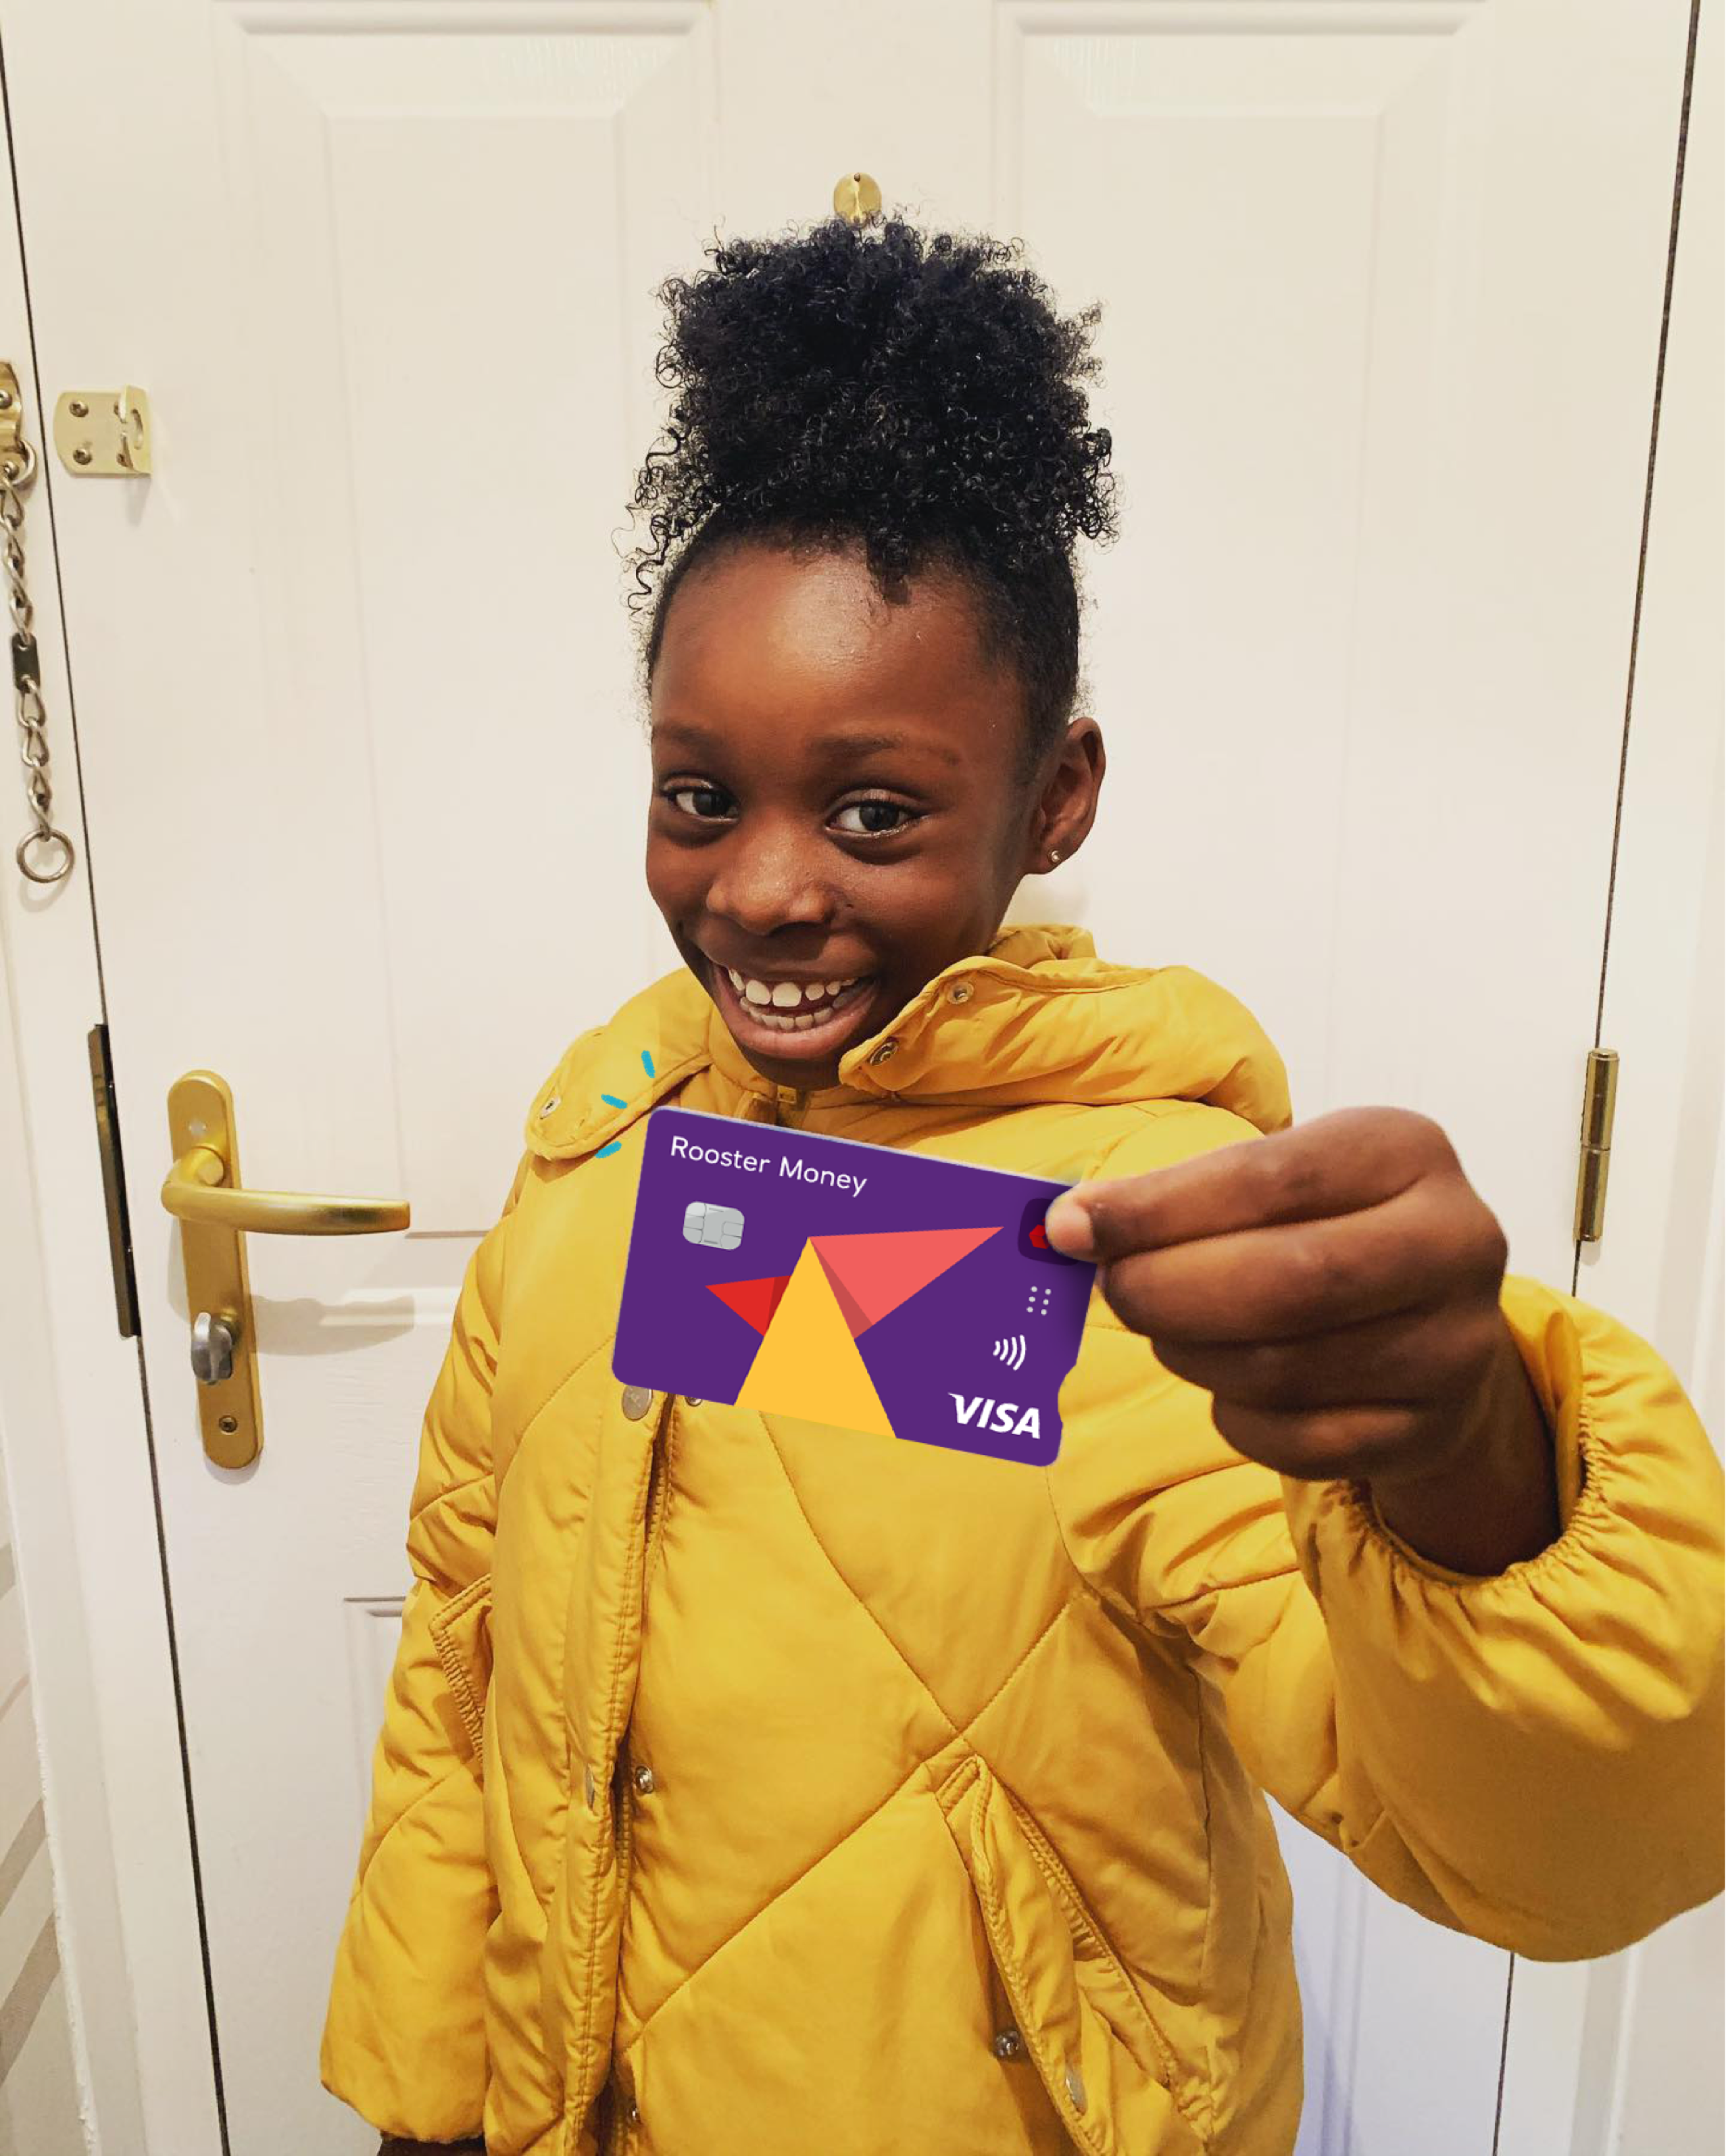 A girl wearing a yellow puffer jacket is smiling and holding up a rooster money card